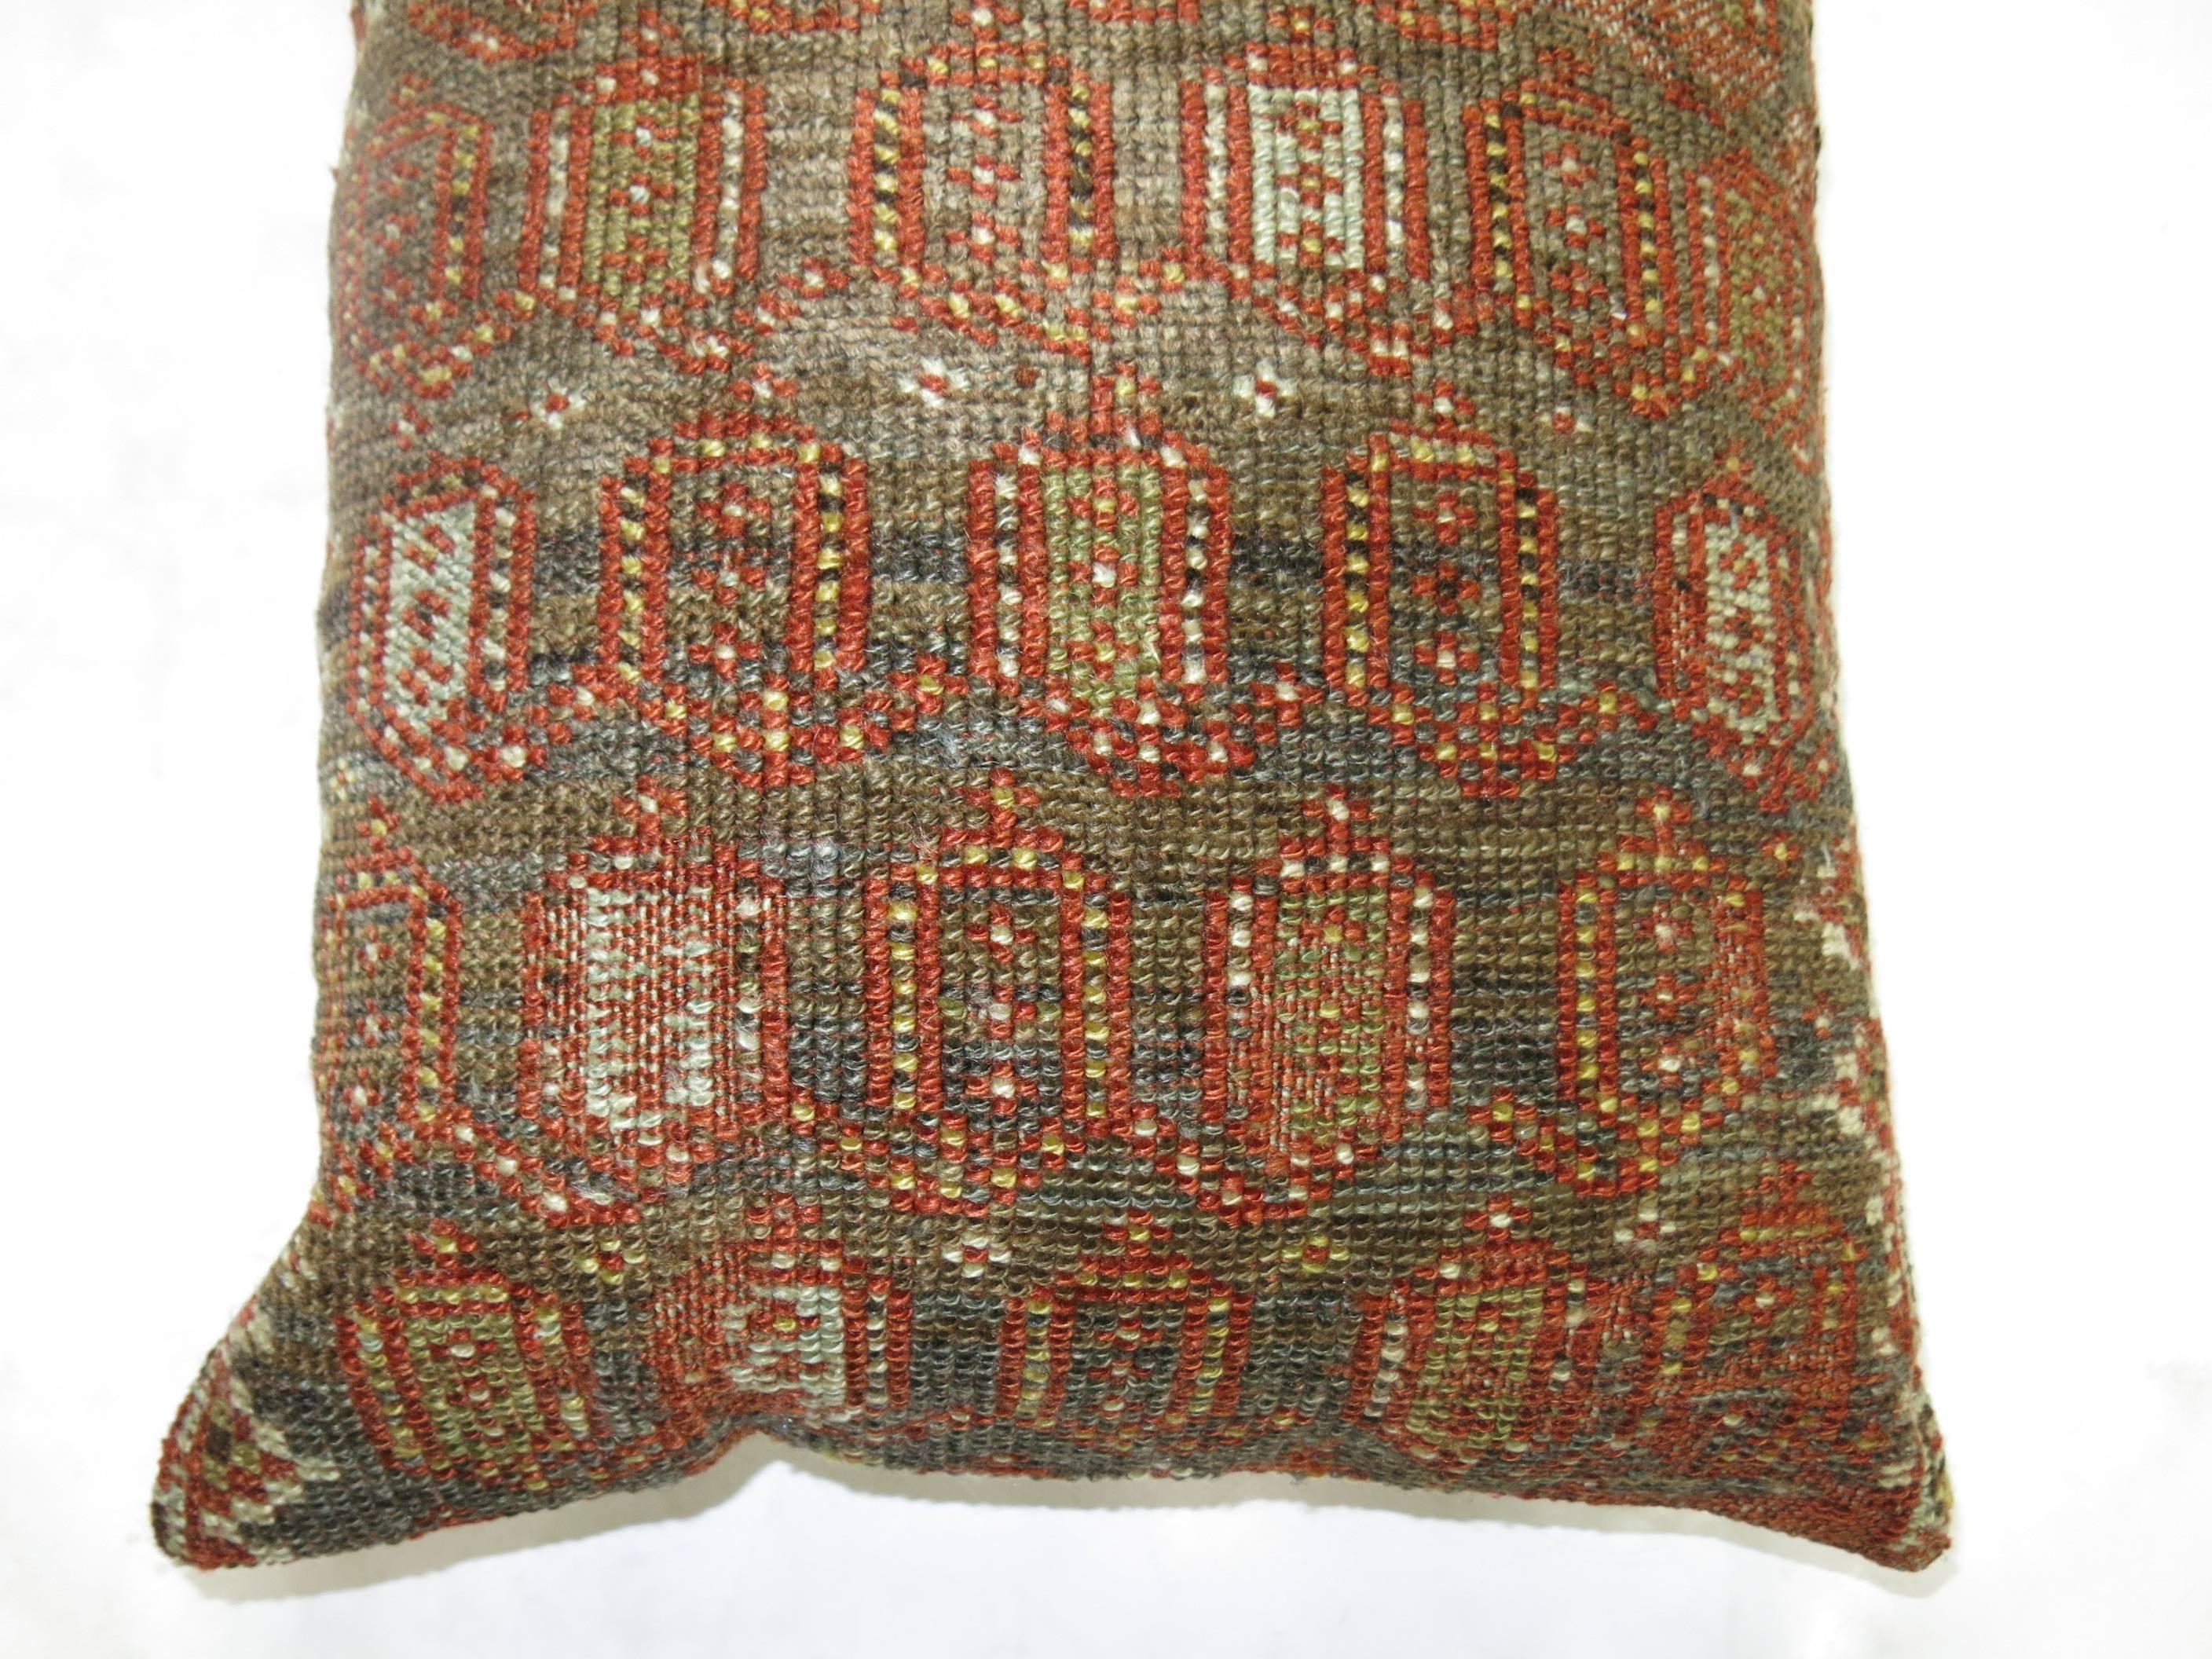 Pillow made from an antique Persian Malayer rug in dominant brown color

Measures: 16” x 24”.